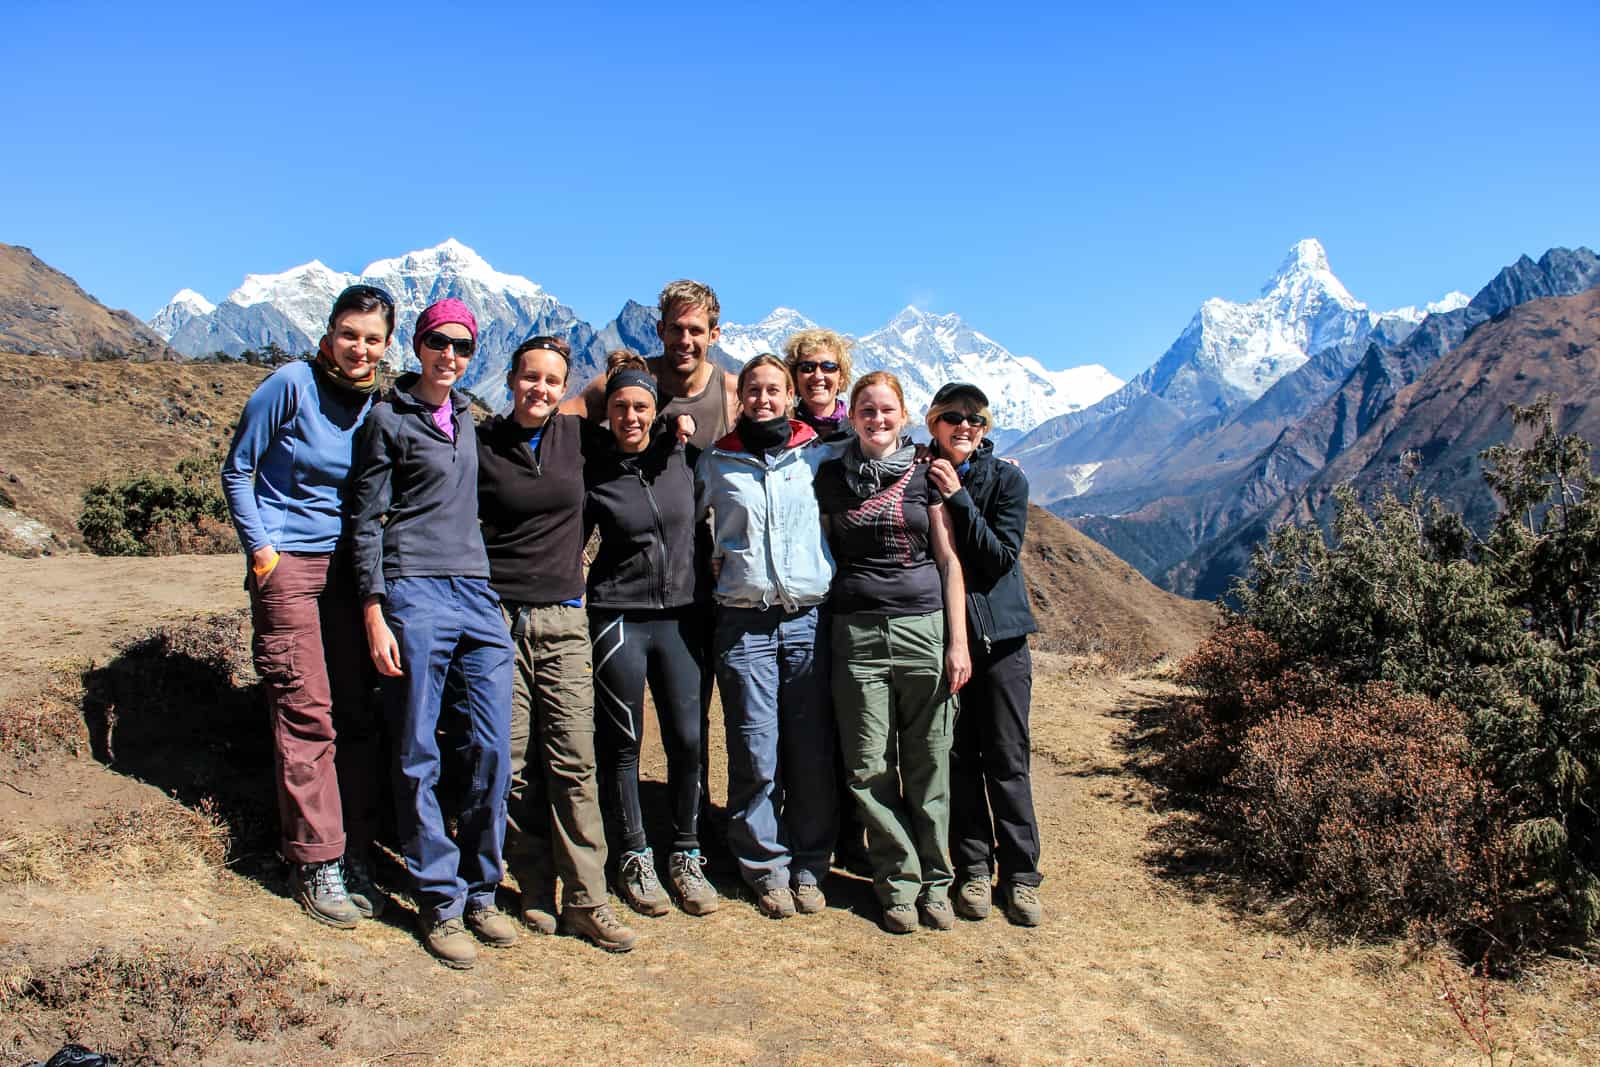 Nine people stand together on a dry, yellow mountain ridge in front of the snow capped Himalaya mountain range and Mount Everest